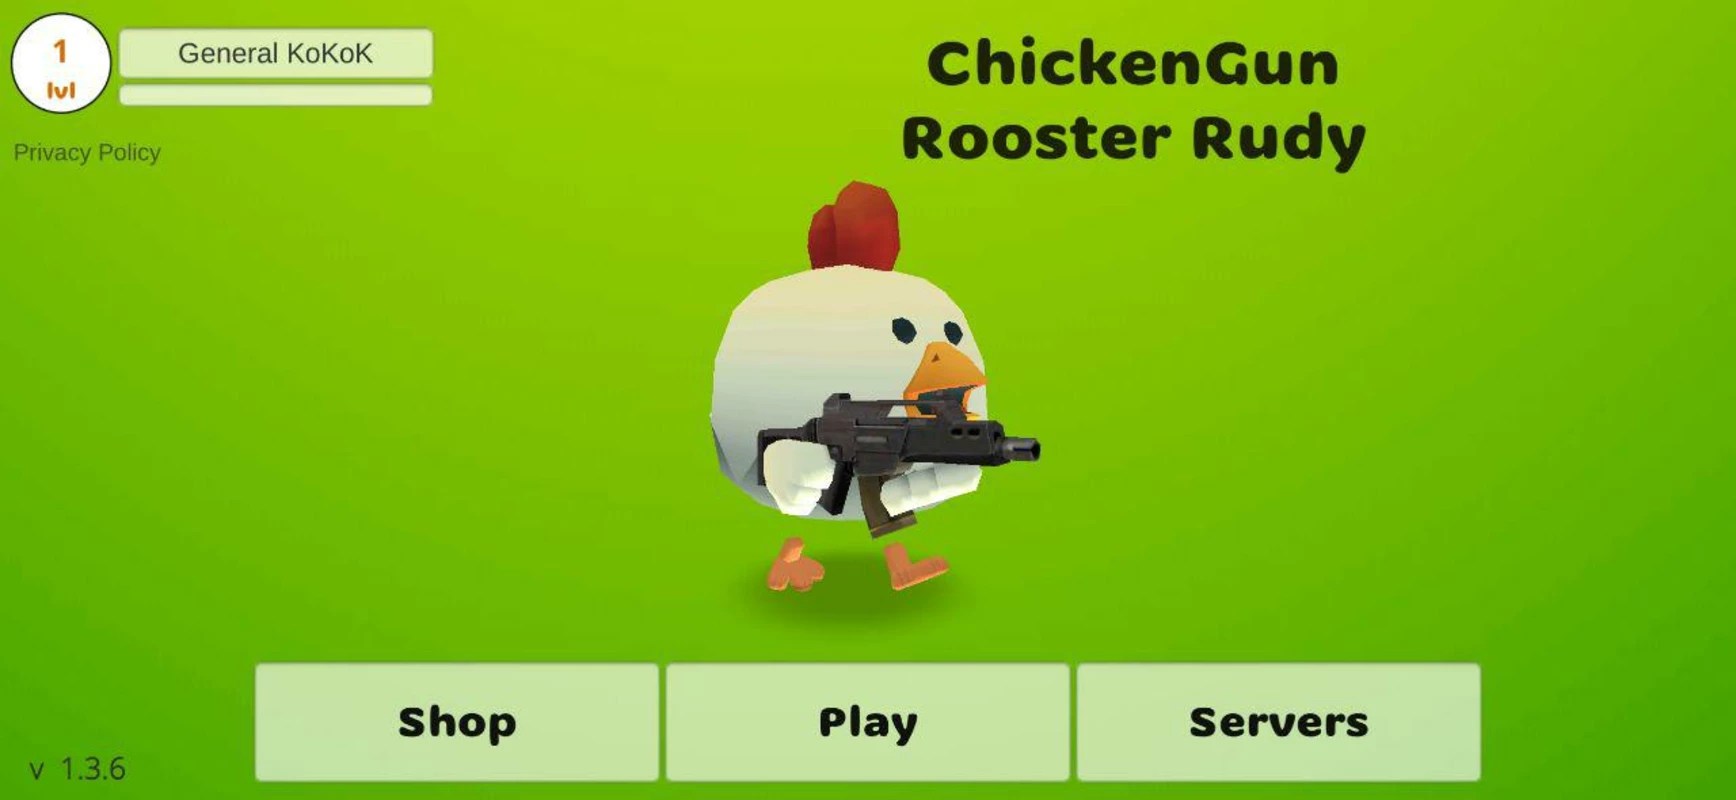 Chickens Gun 4.0.2 APK for Android Screenshot 1